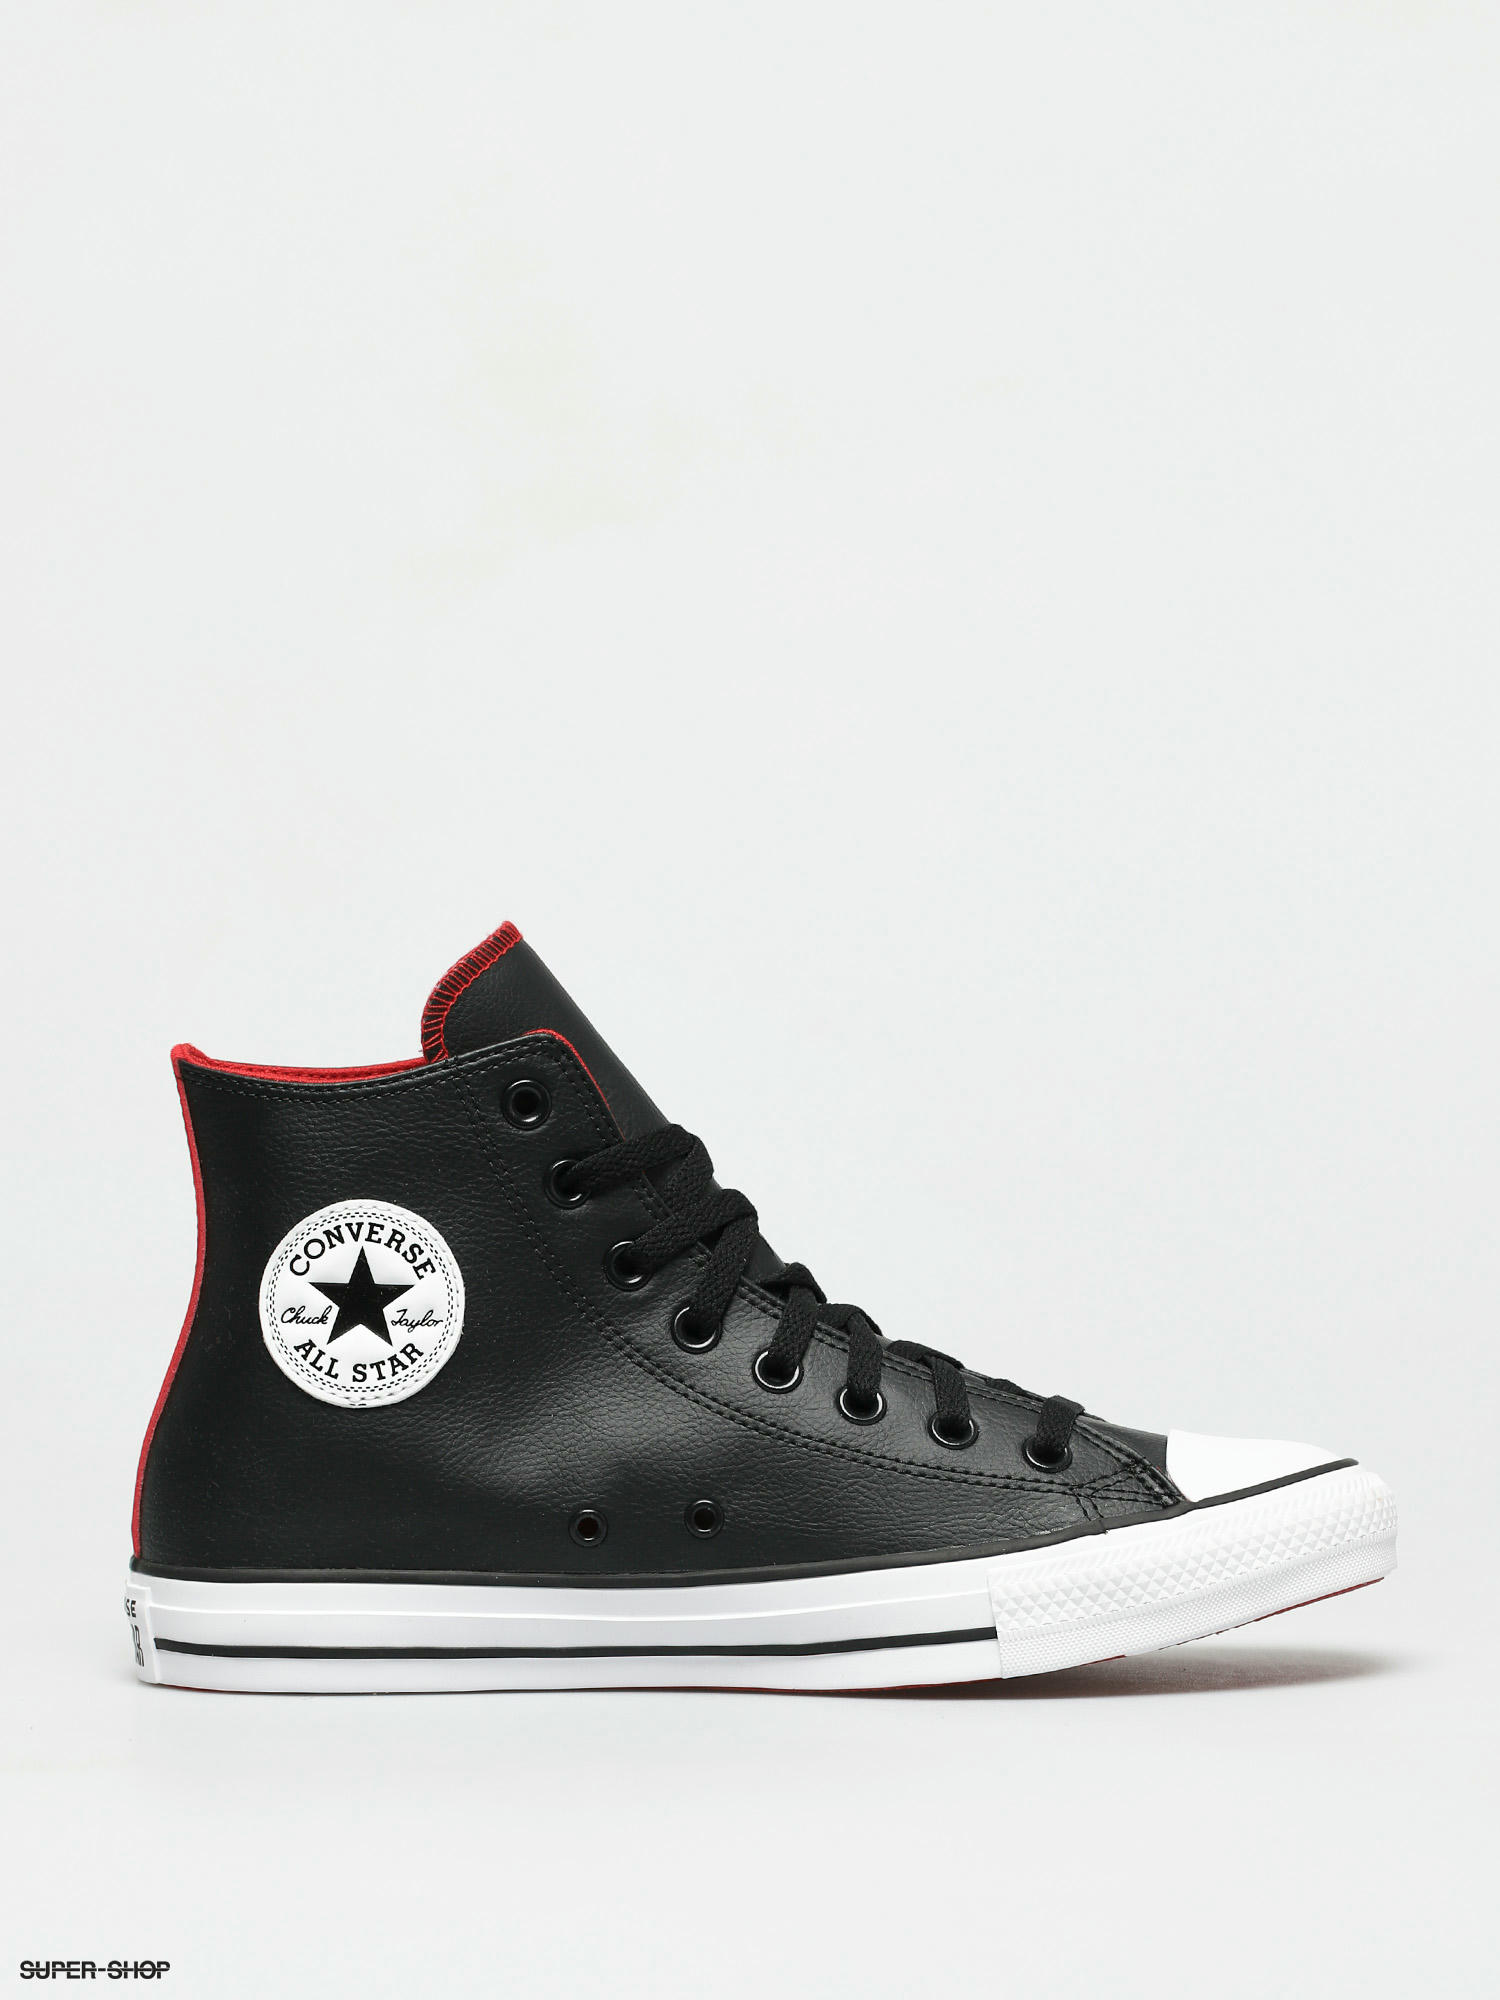 converse all star black and red